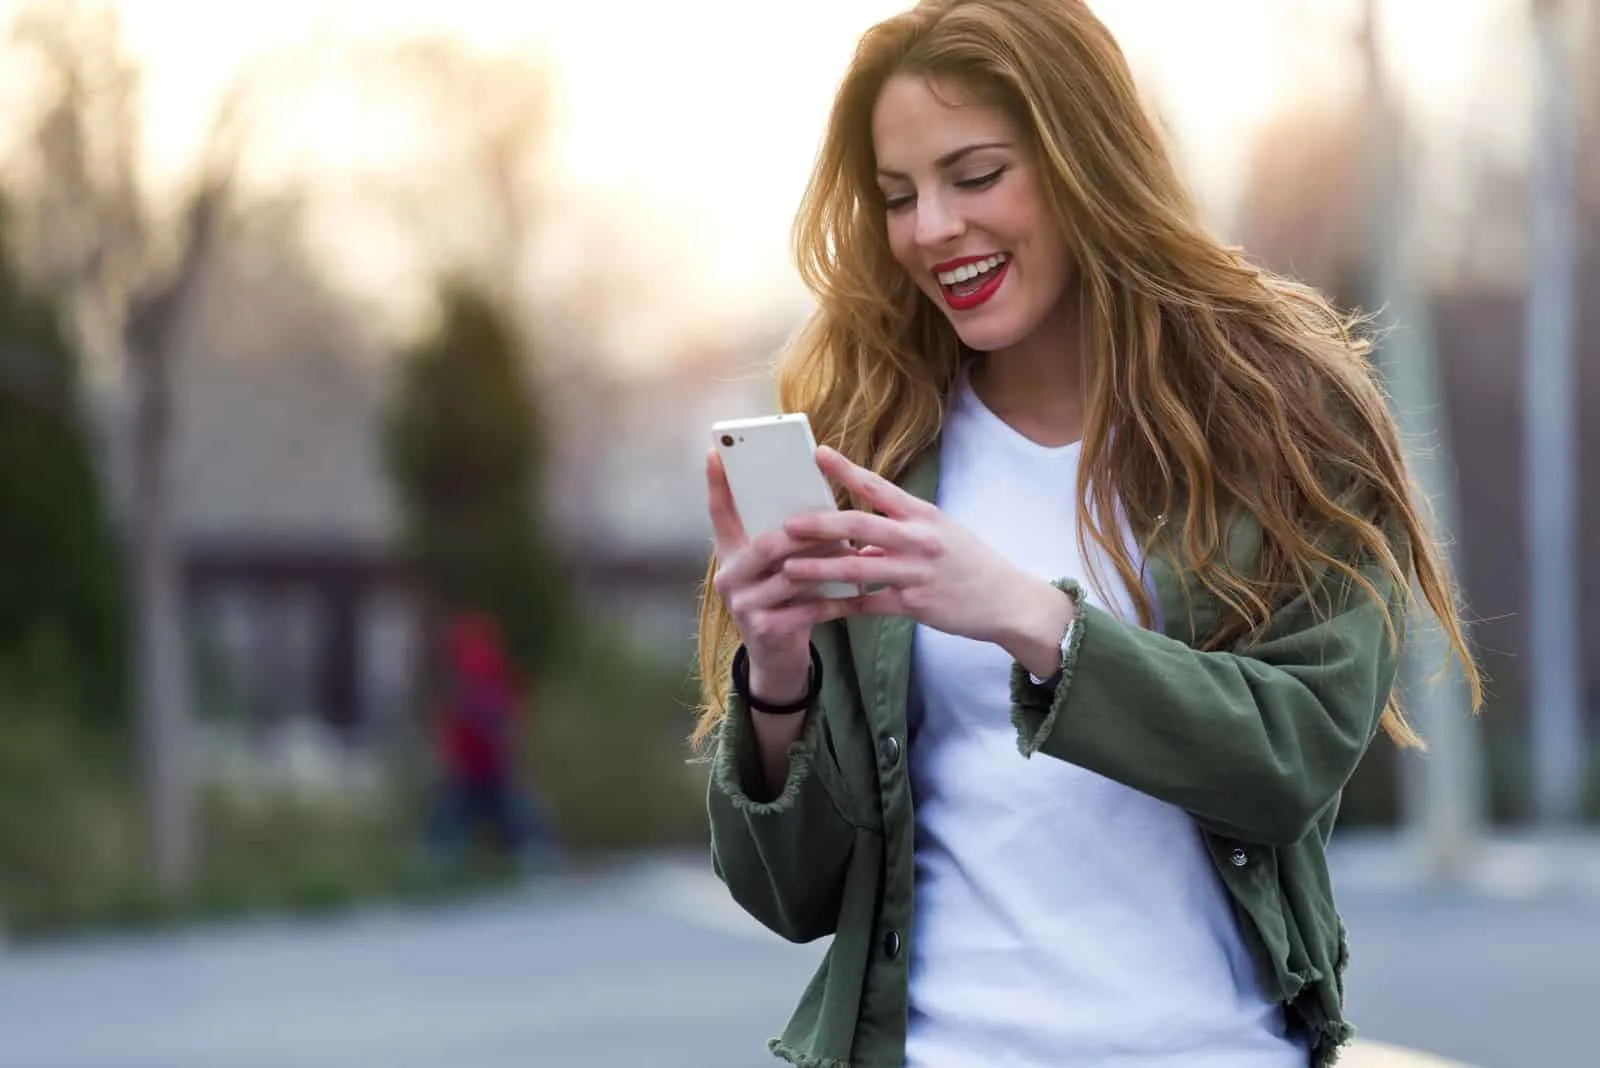 a smiling brown-haired woman stands on the street and buttons on the phone